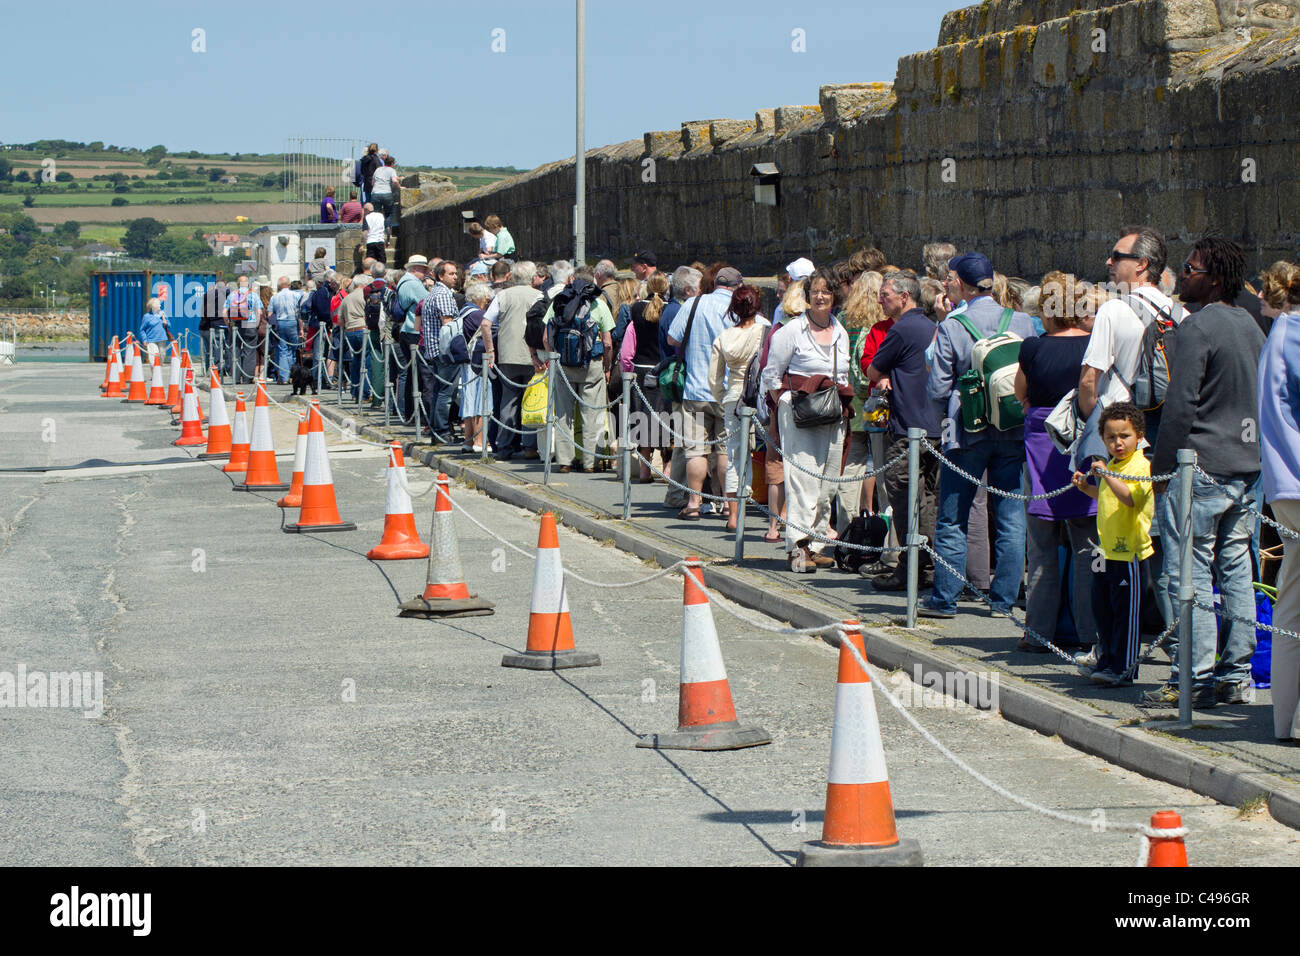 A long queue of people on Penzance pier waiting to board the Scillonian III ferry to the Isles of Scilly. Stock Photo